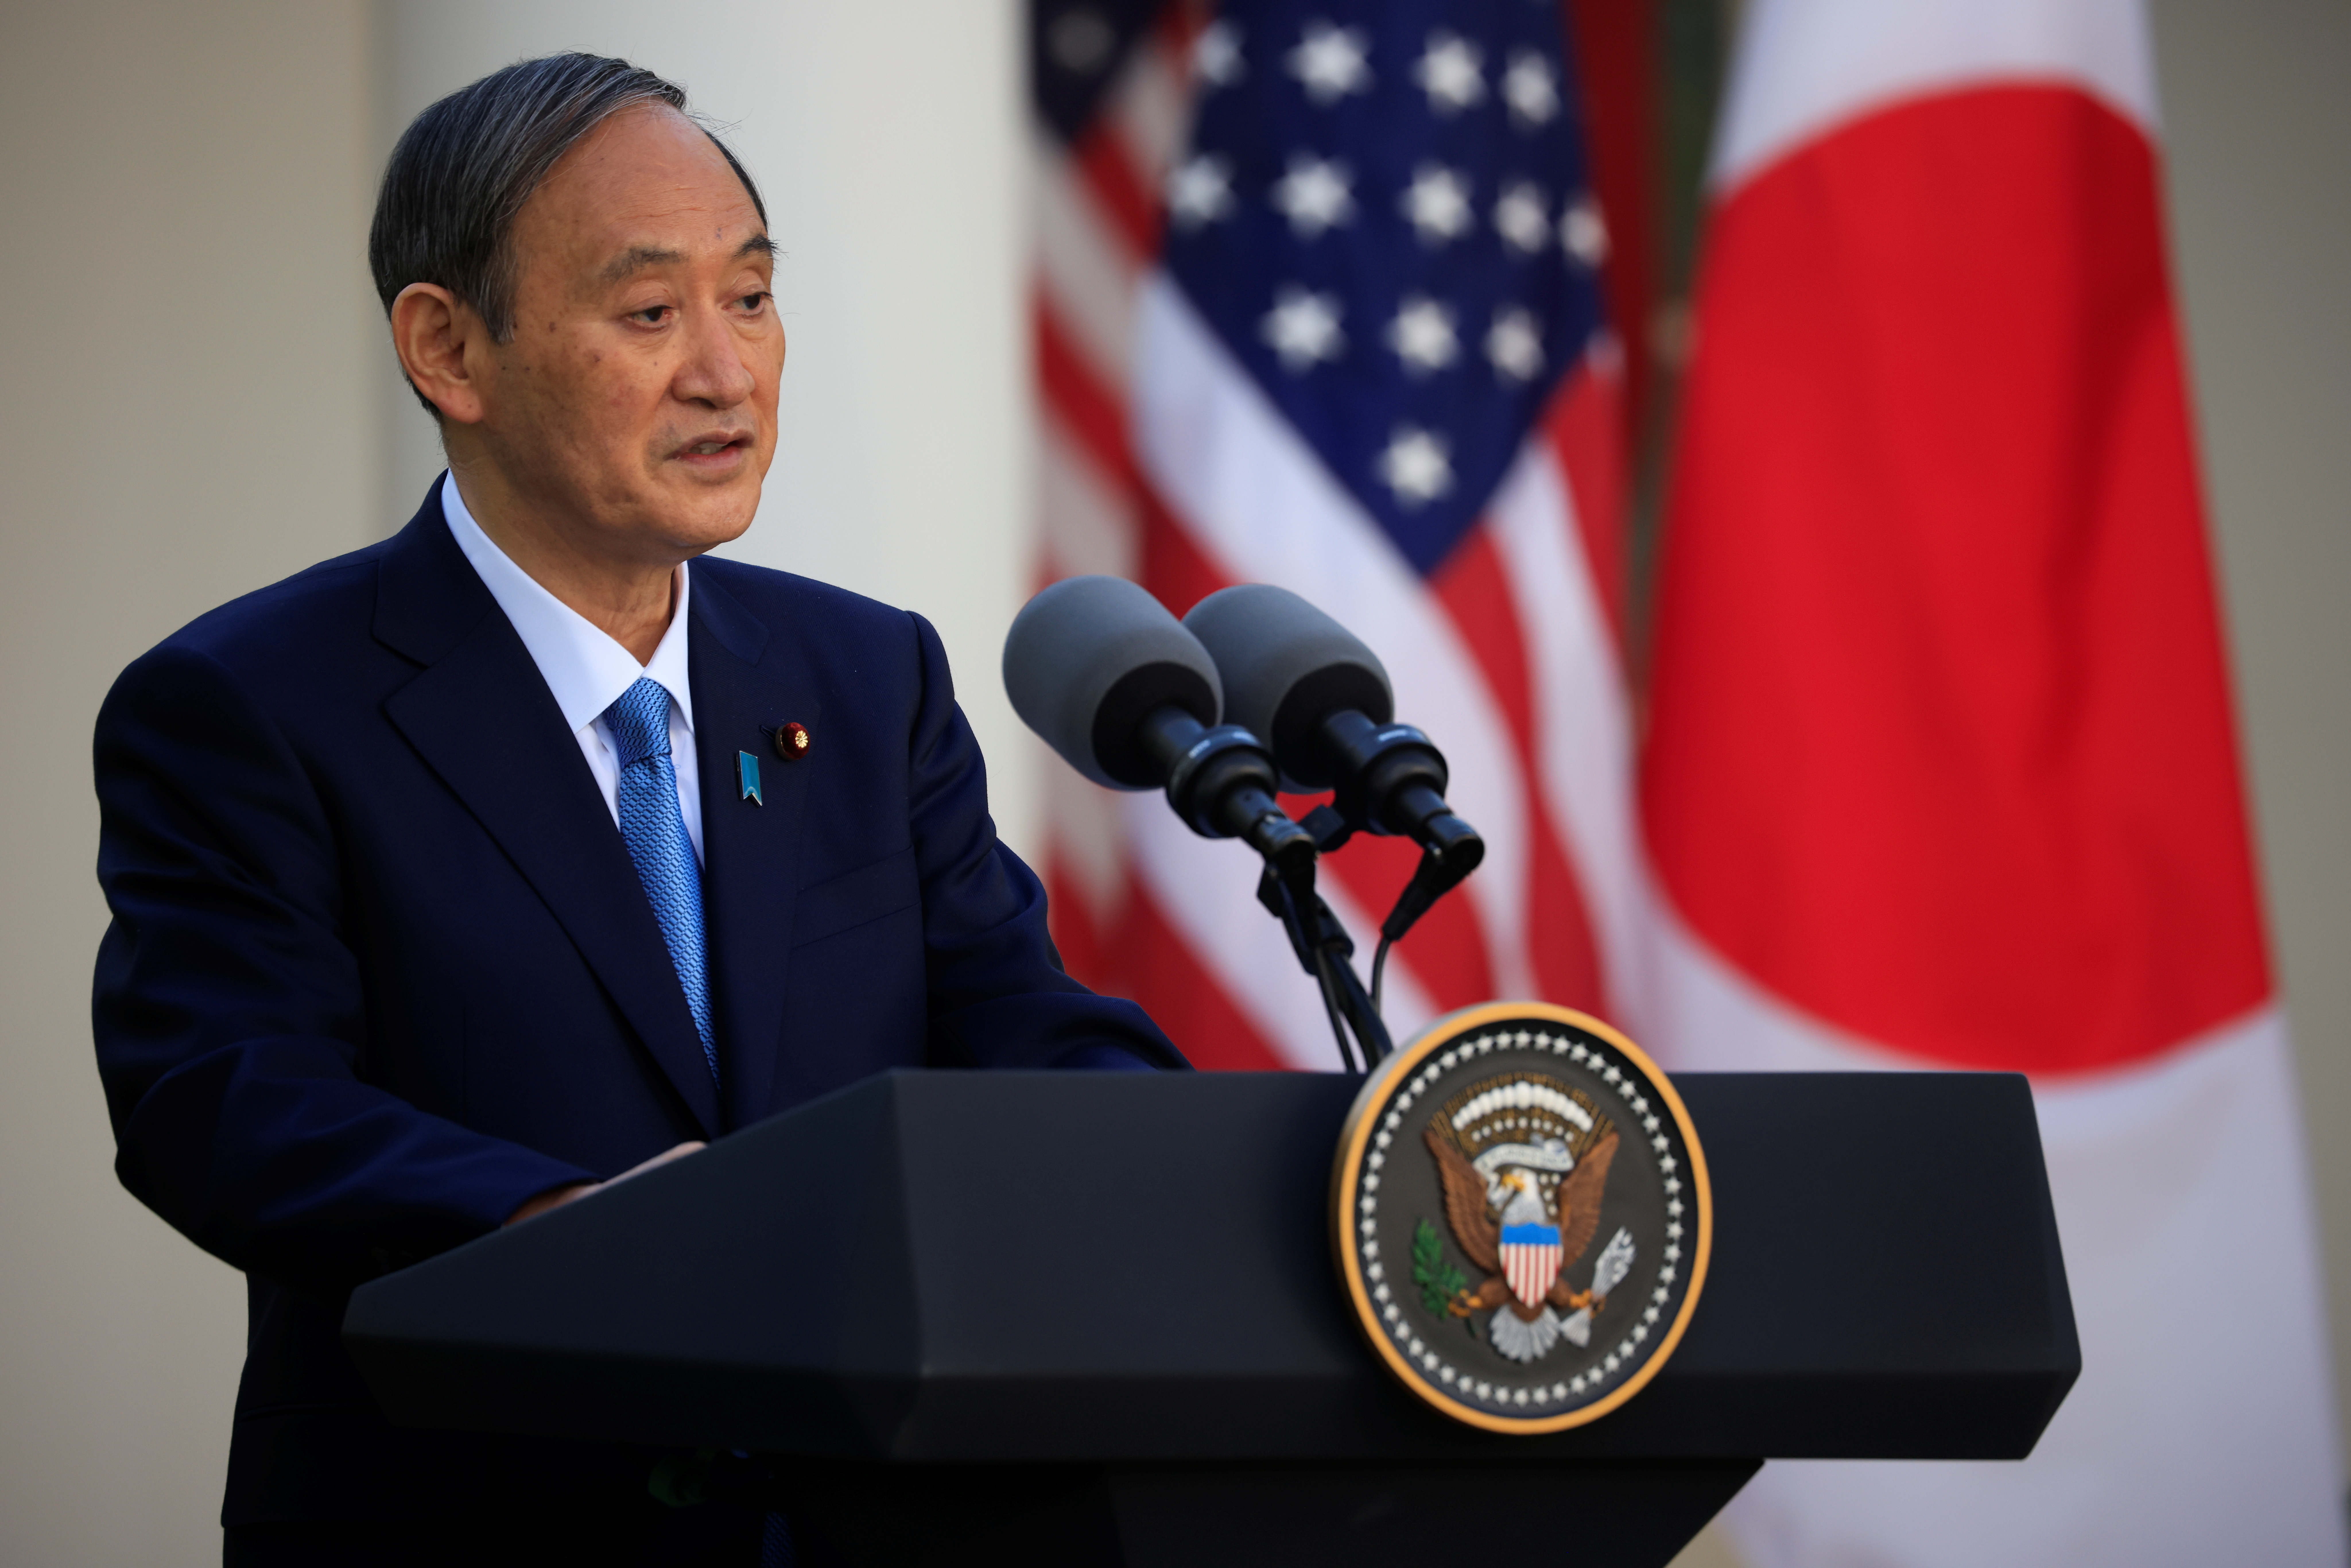 Japan's Prime Minister Yoshihide Suga addresses a joint news conference with U.S. President Joe Biden in the Rose Garden at the White House in Washington, U.S., April 16, 2021. REUTERS/Tom Brenner